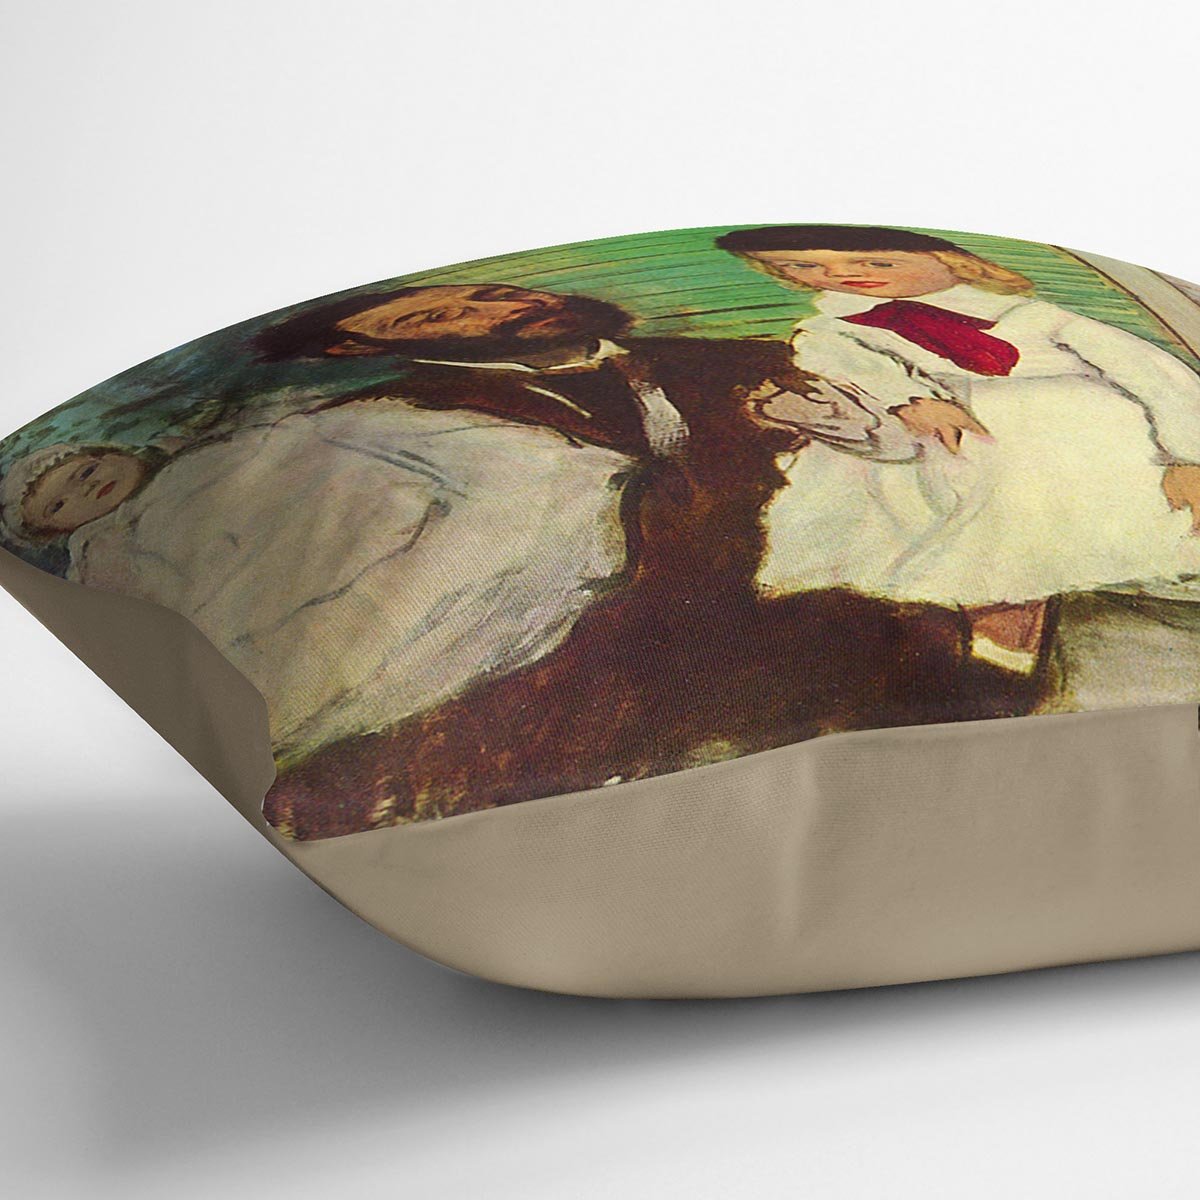 Portrait of Count Lepic and his daughters by Degas Cushion